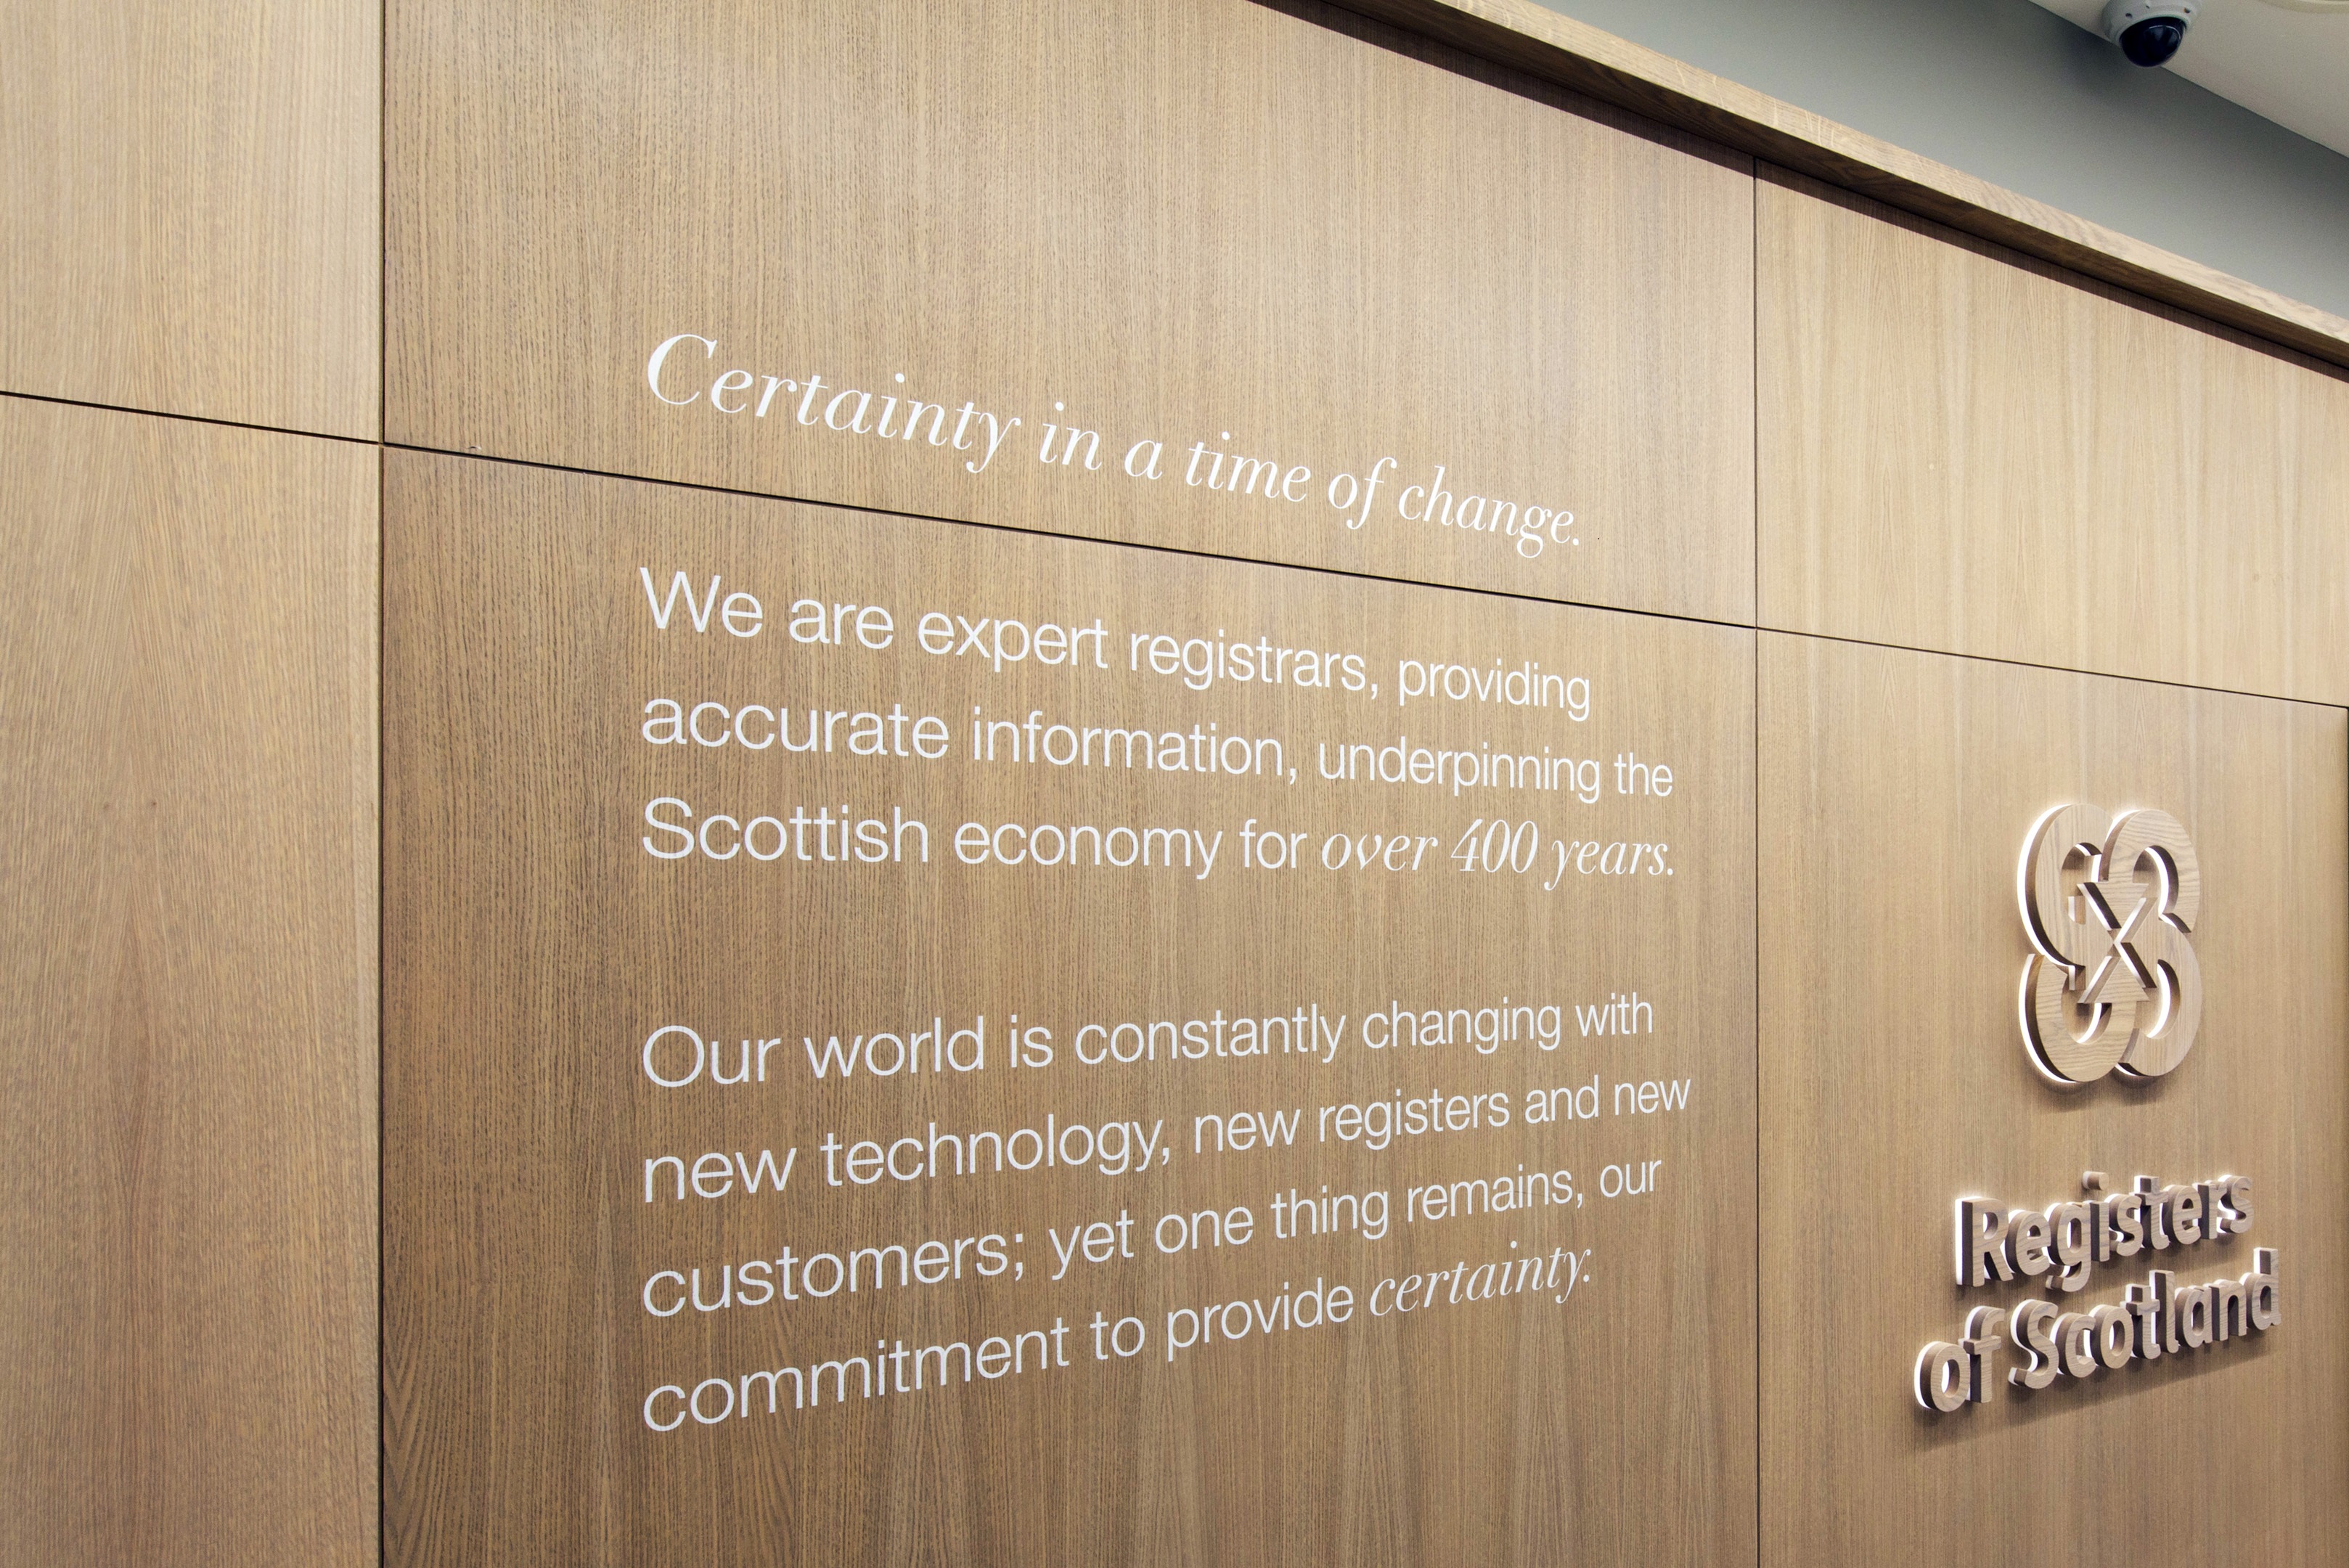 Quote on the wall saying ' Certainty in a time of change